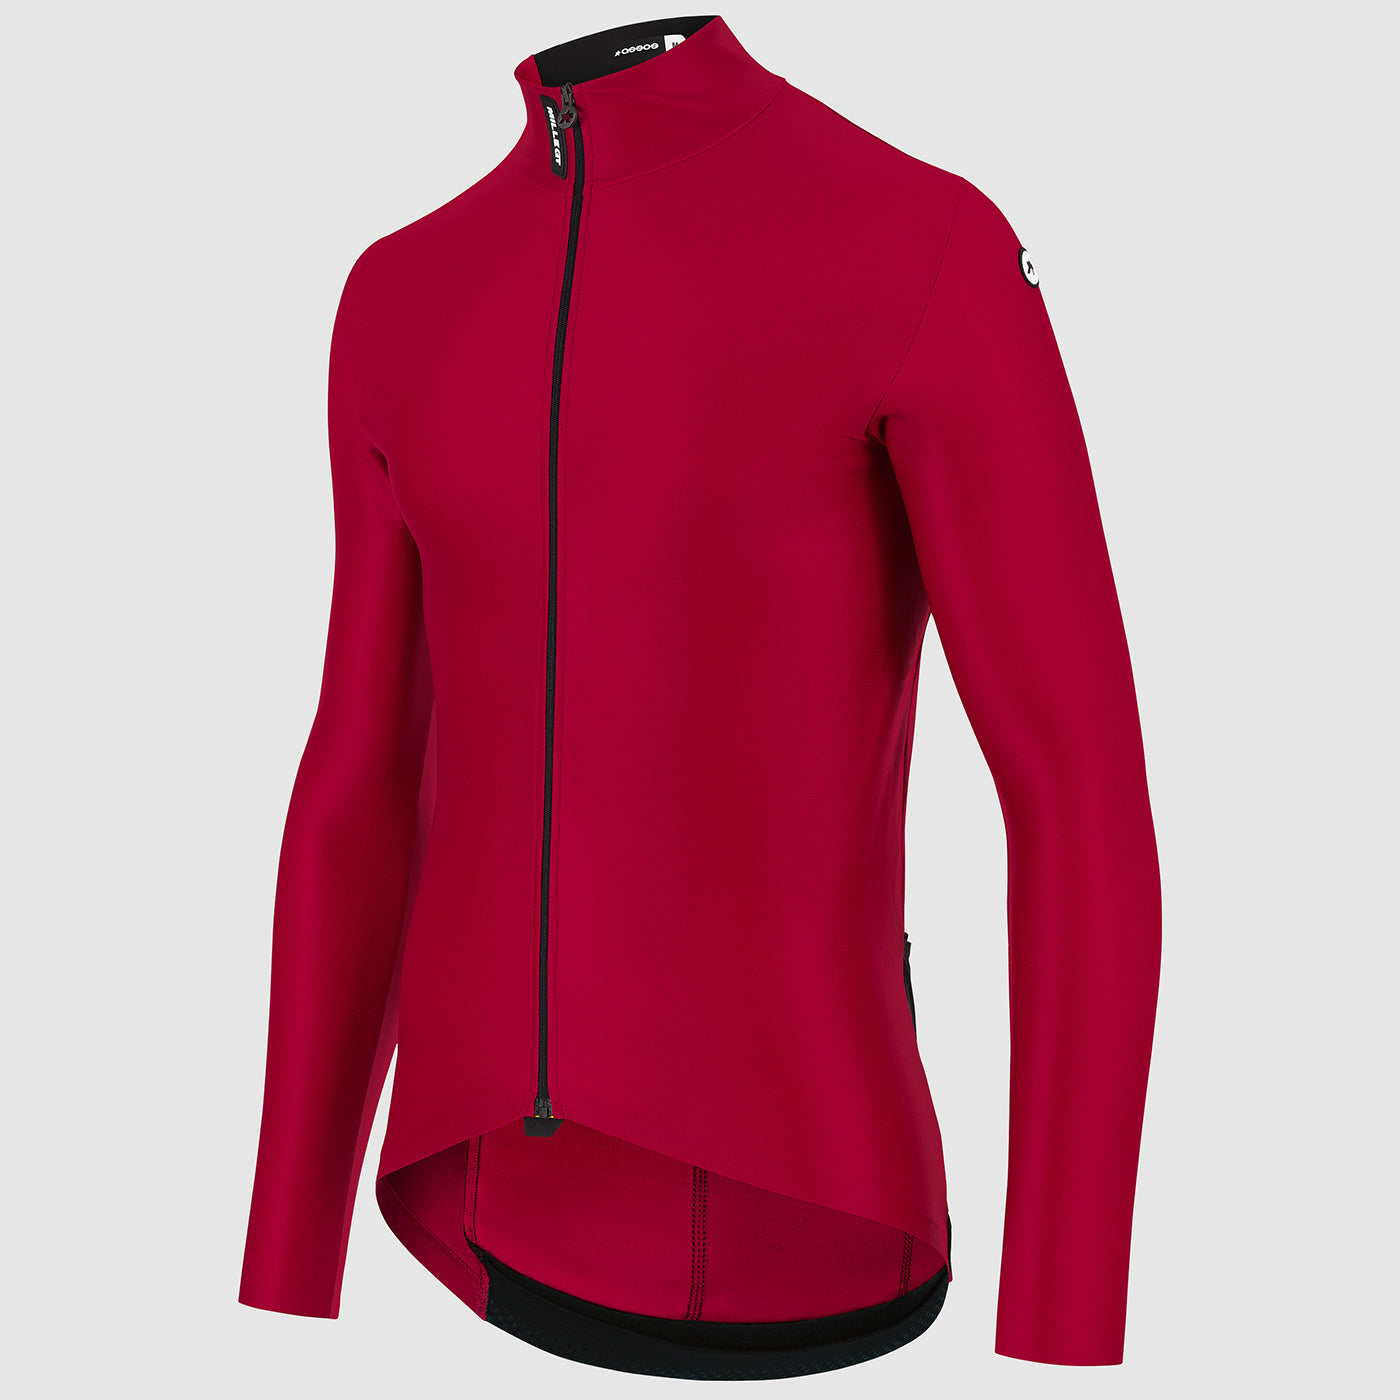 Maillot manches long Assos Mille GT Spring Fall C2 - Rouge